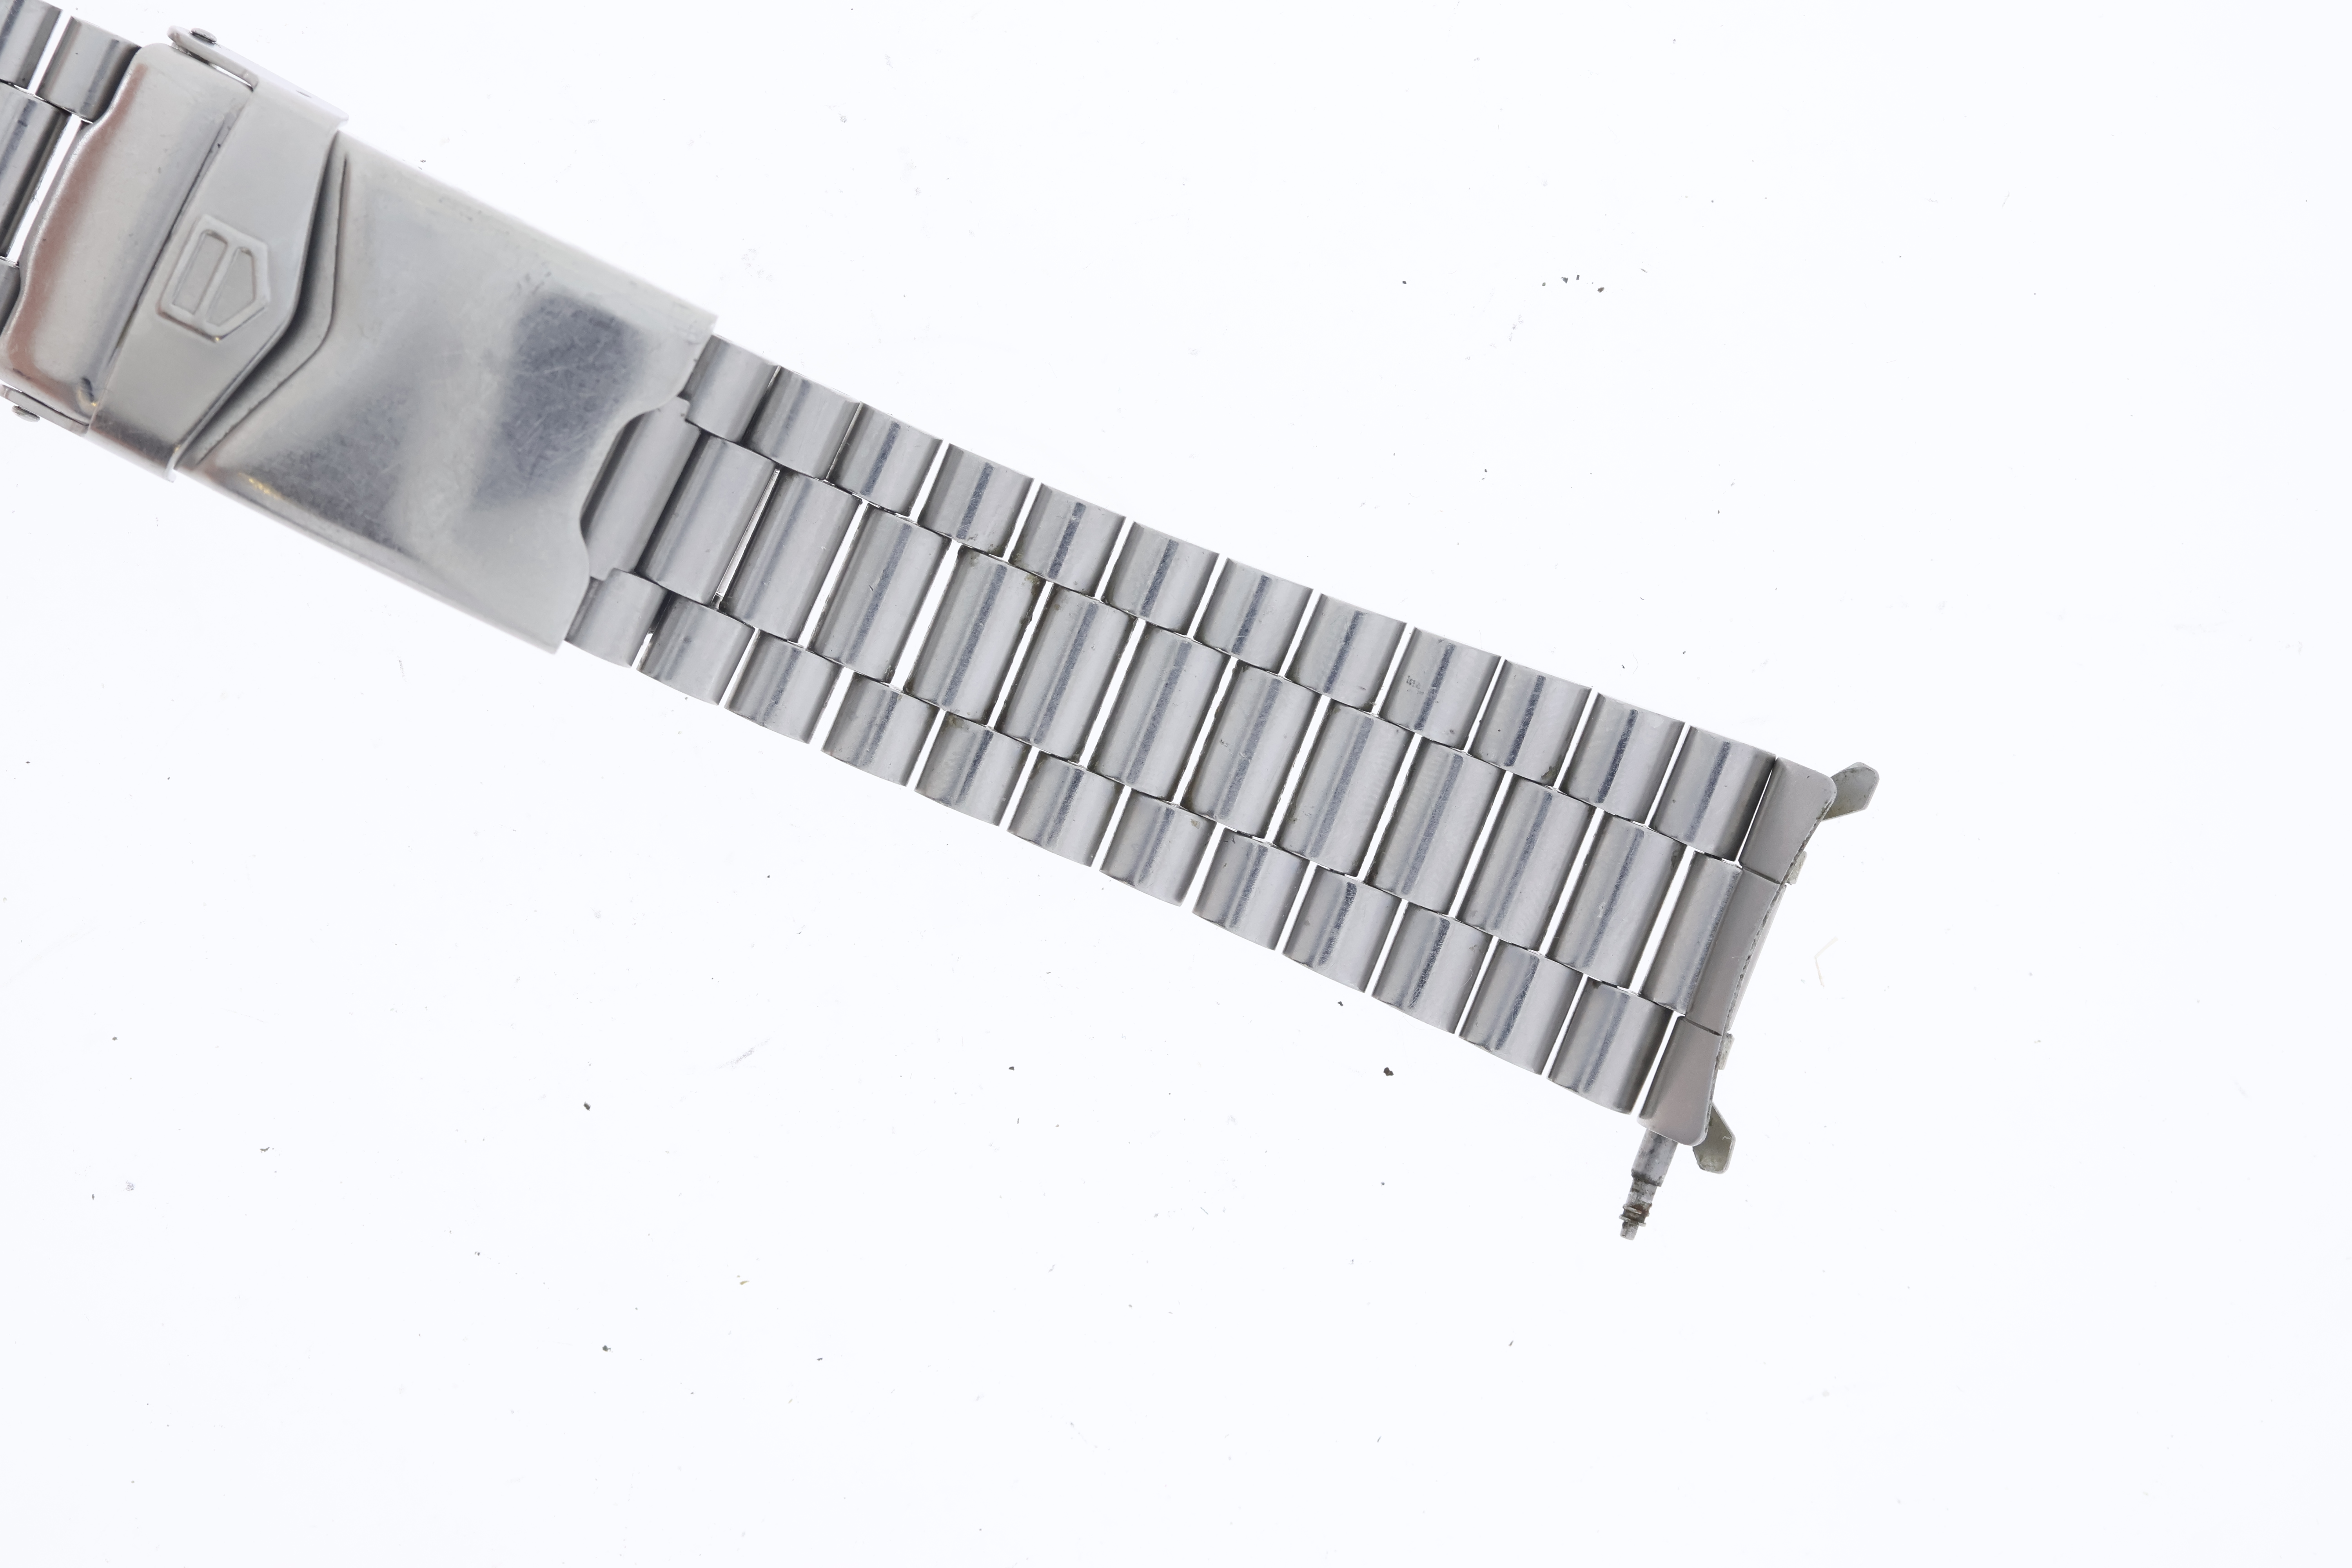 Tag Heuer 2000's 1st gen stainless steel bracelet with 20mm lugs. 150mm in length, 178 extended - Image 3 of 4